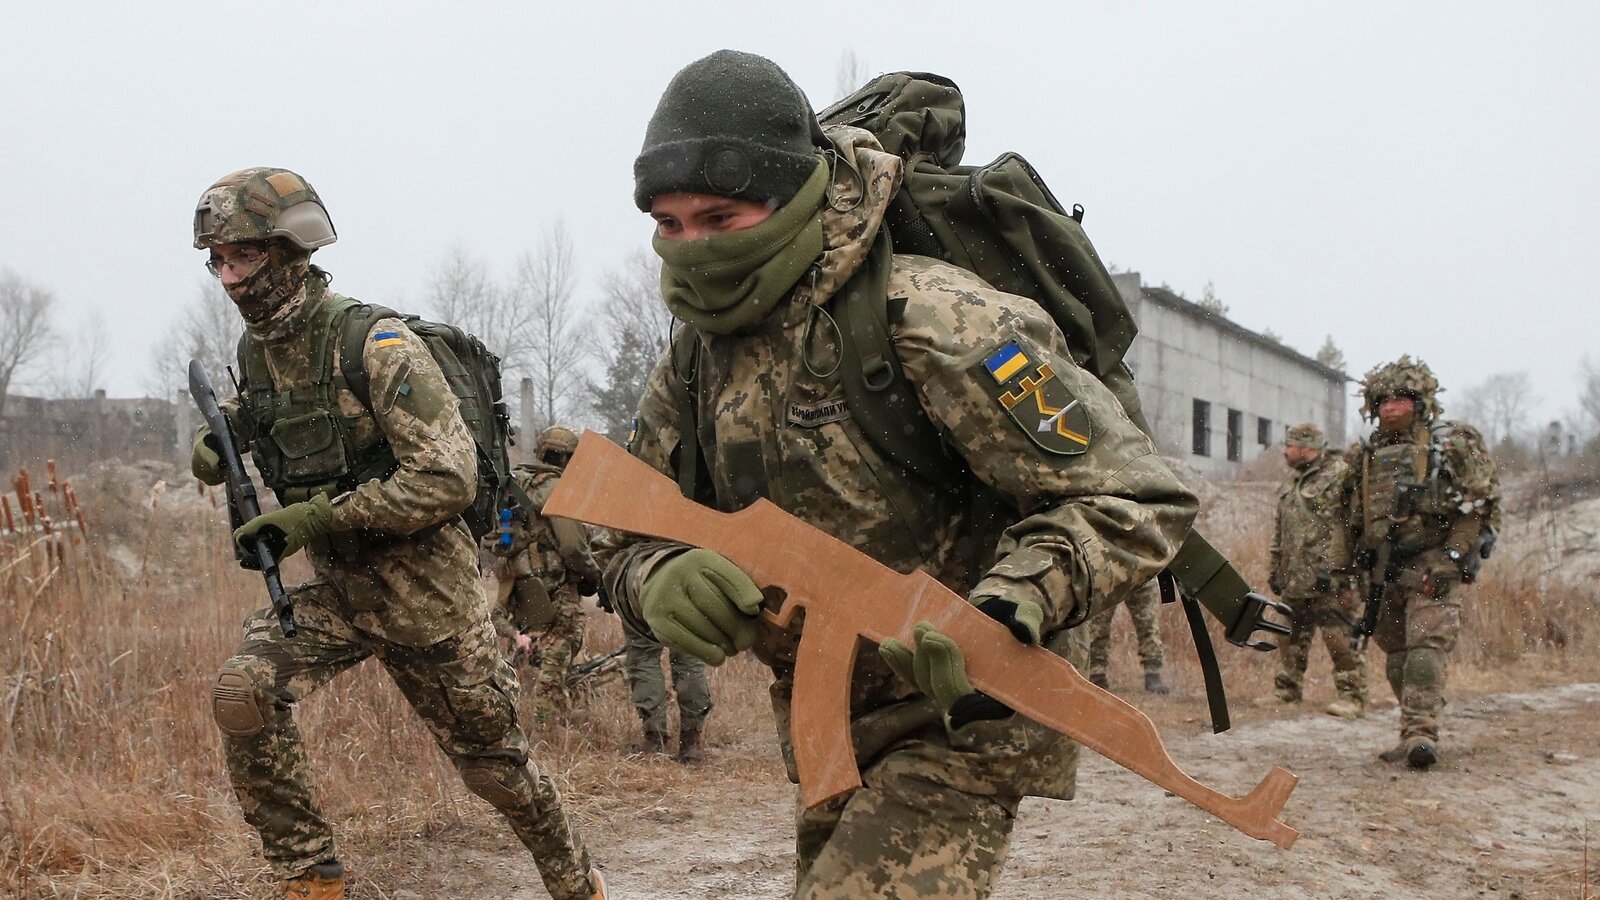 Opinion. Ukraine Doesn't Need the West to Defend It. We Need Help Preparing for War